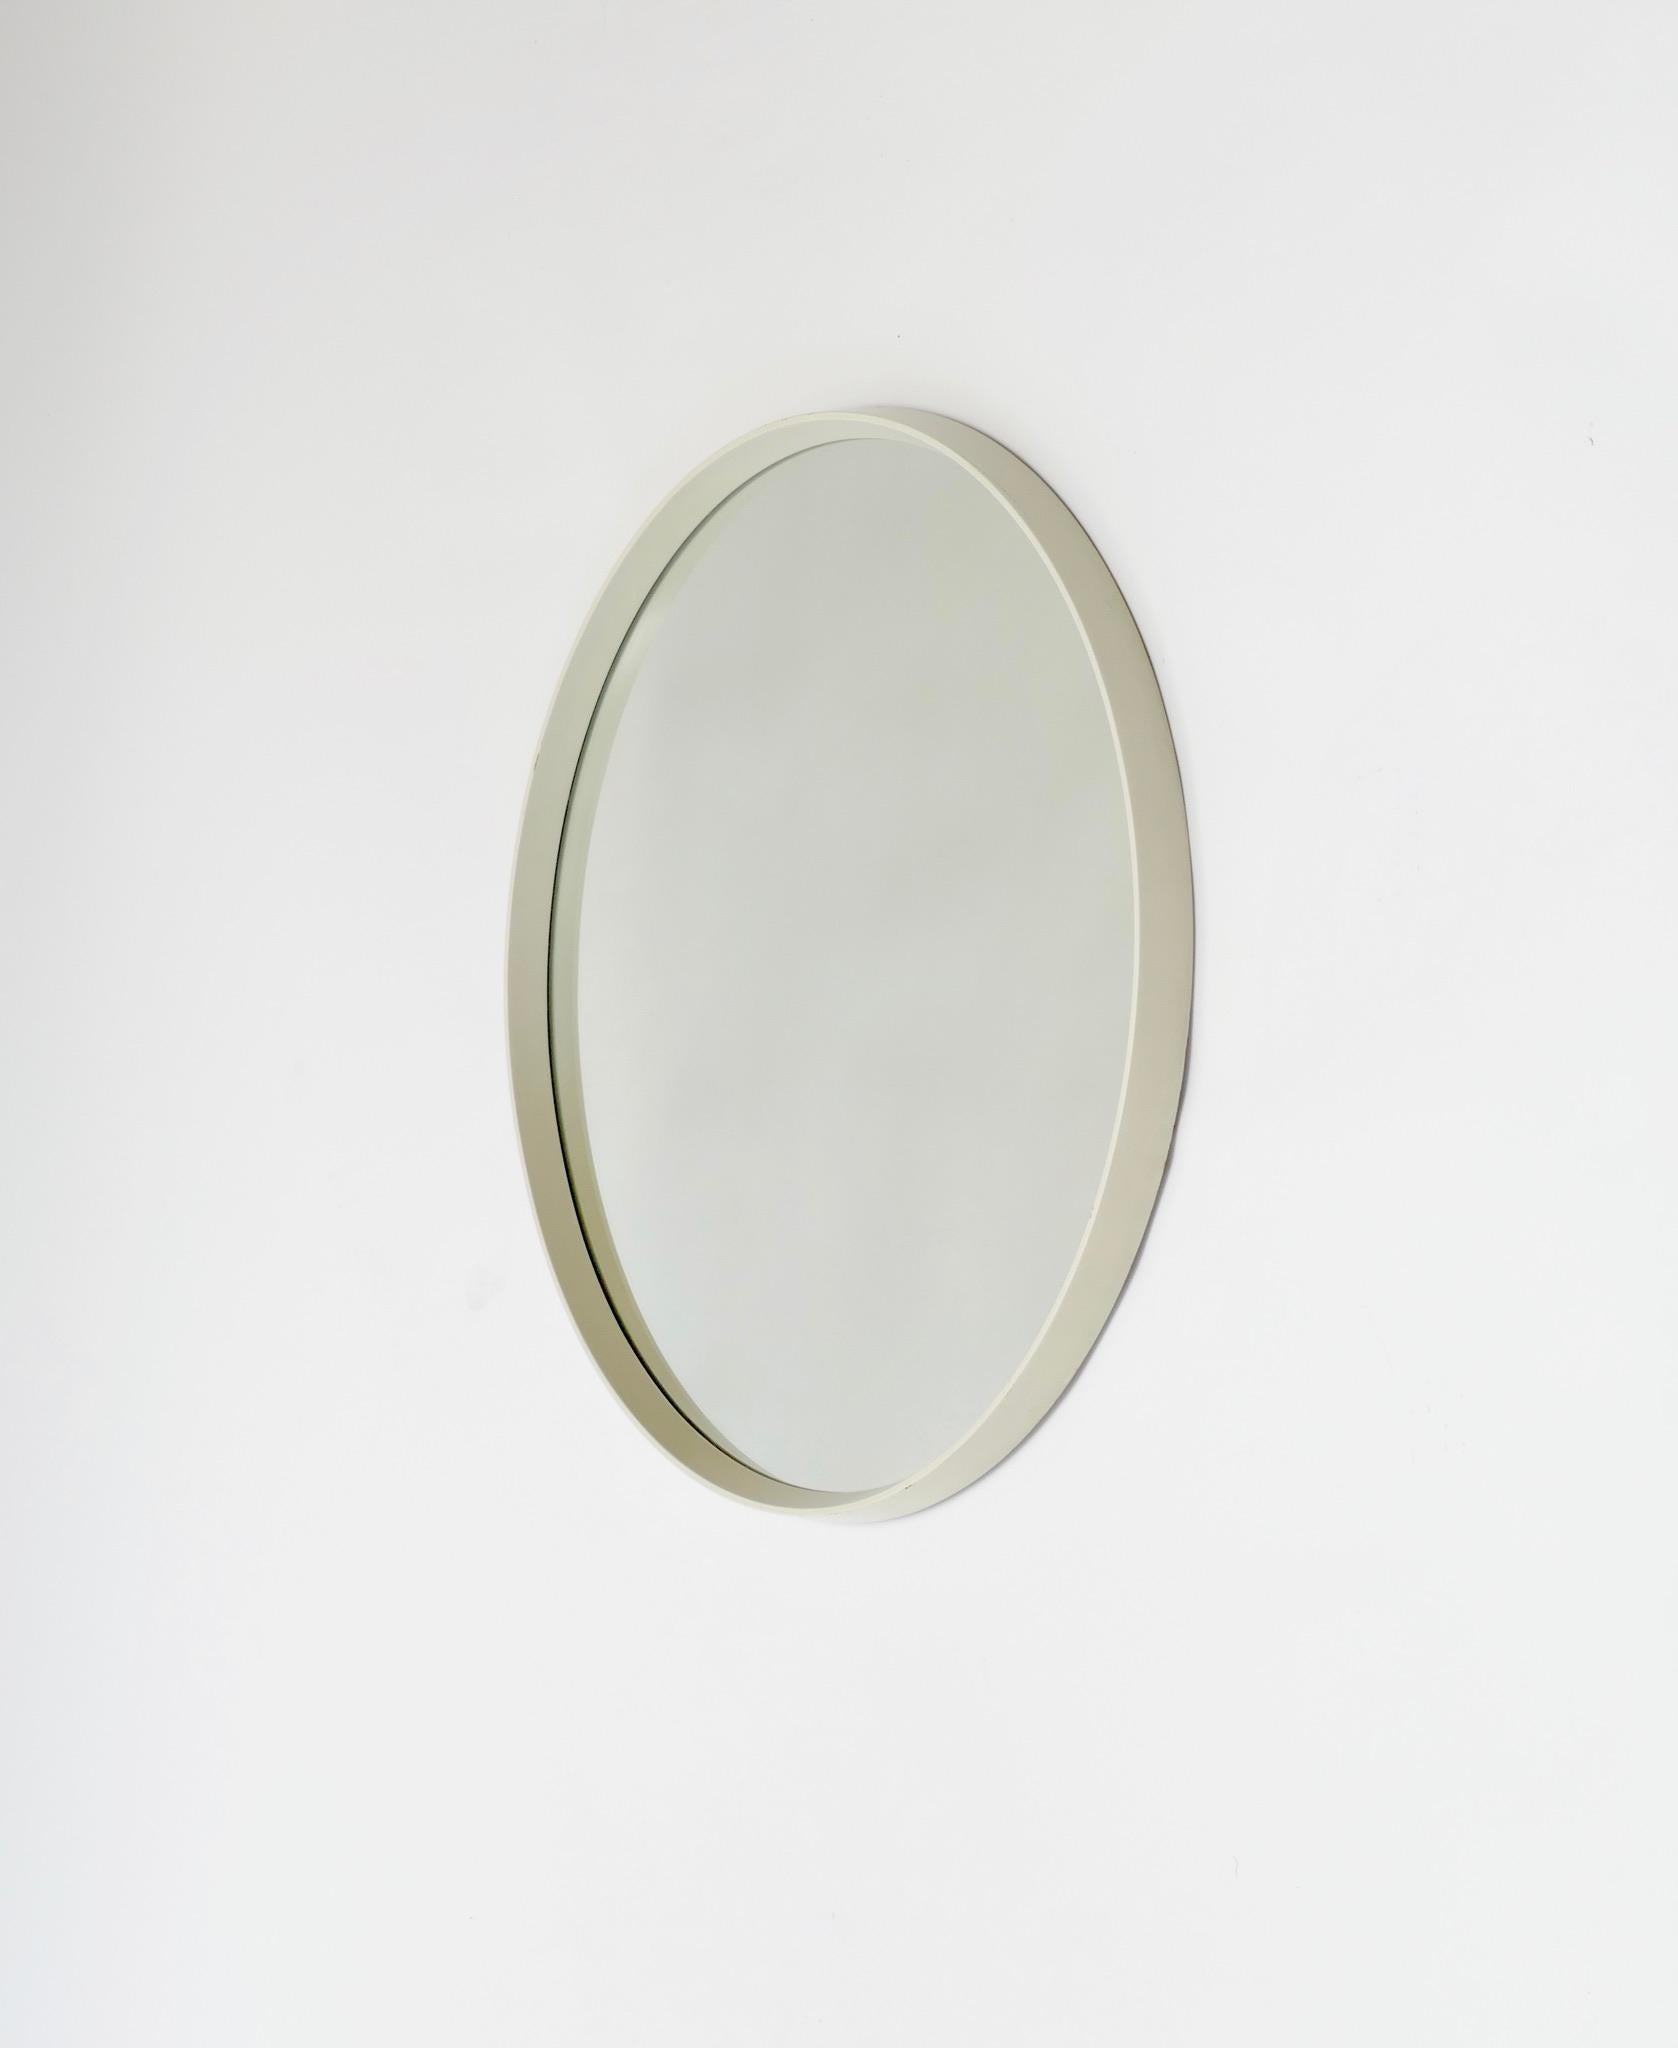 Round mirror with a wood white lacquered frame, Germany, 1970s.
There are similar items to see on my seller page
Measure: D 69 cm.